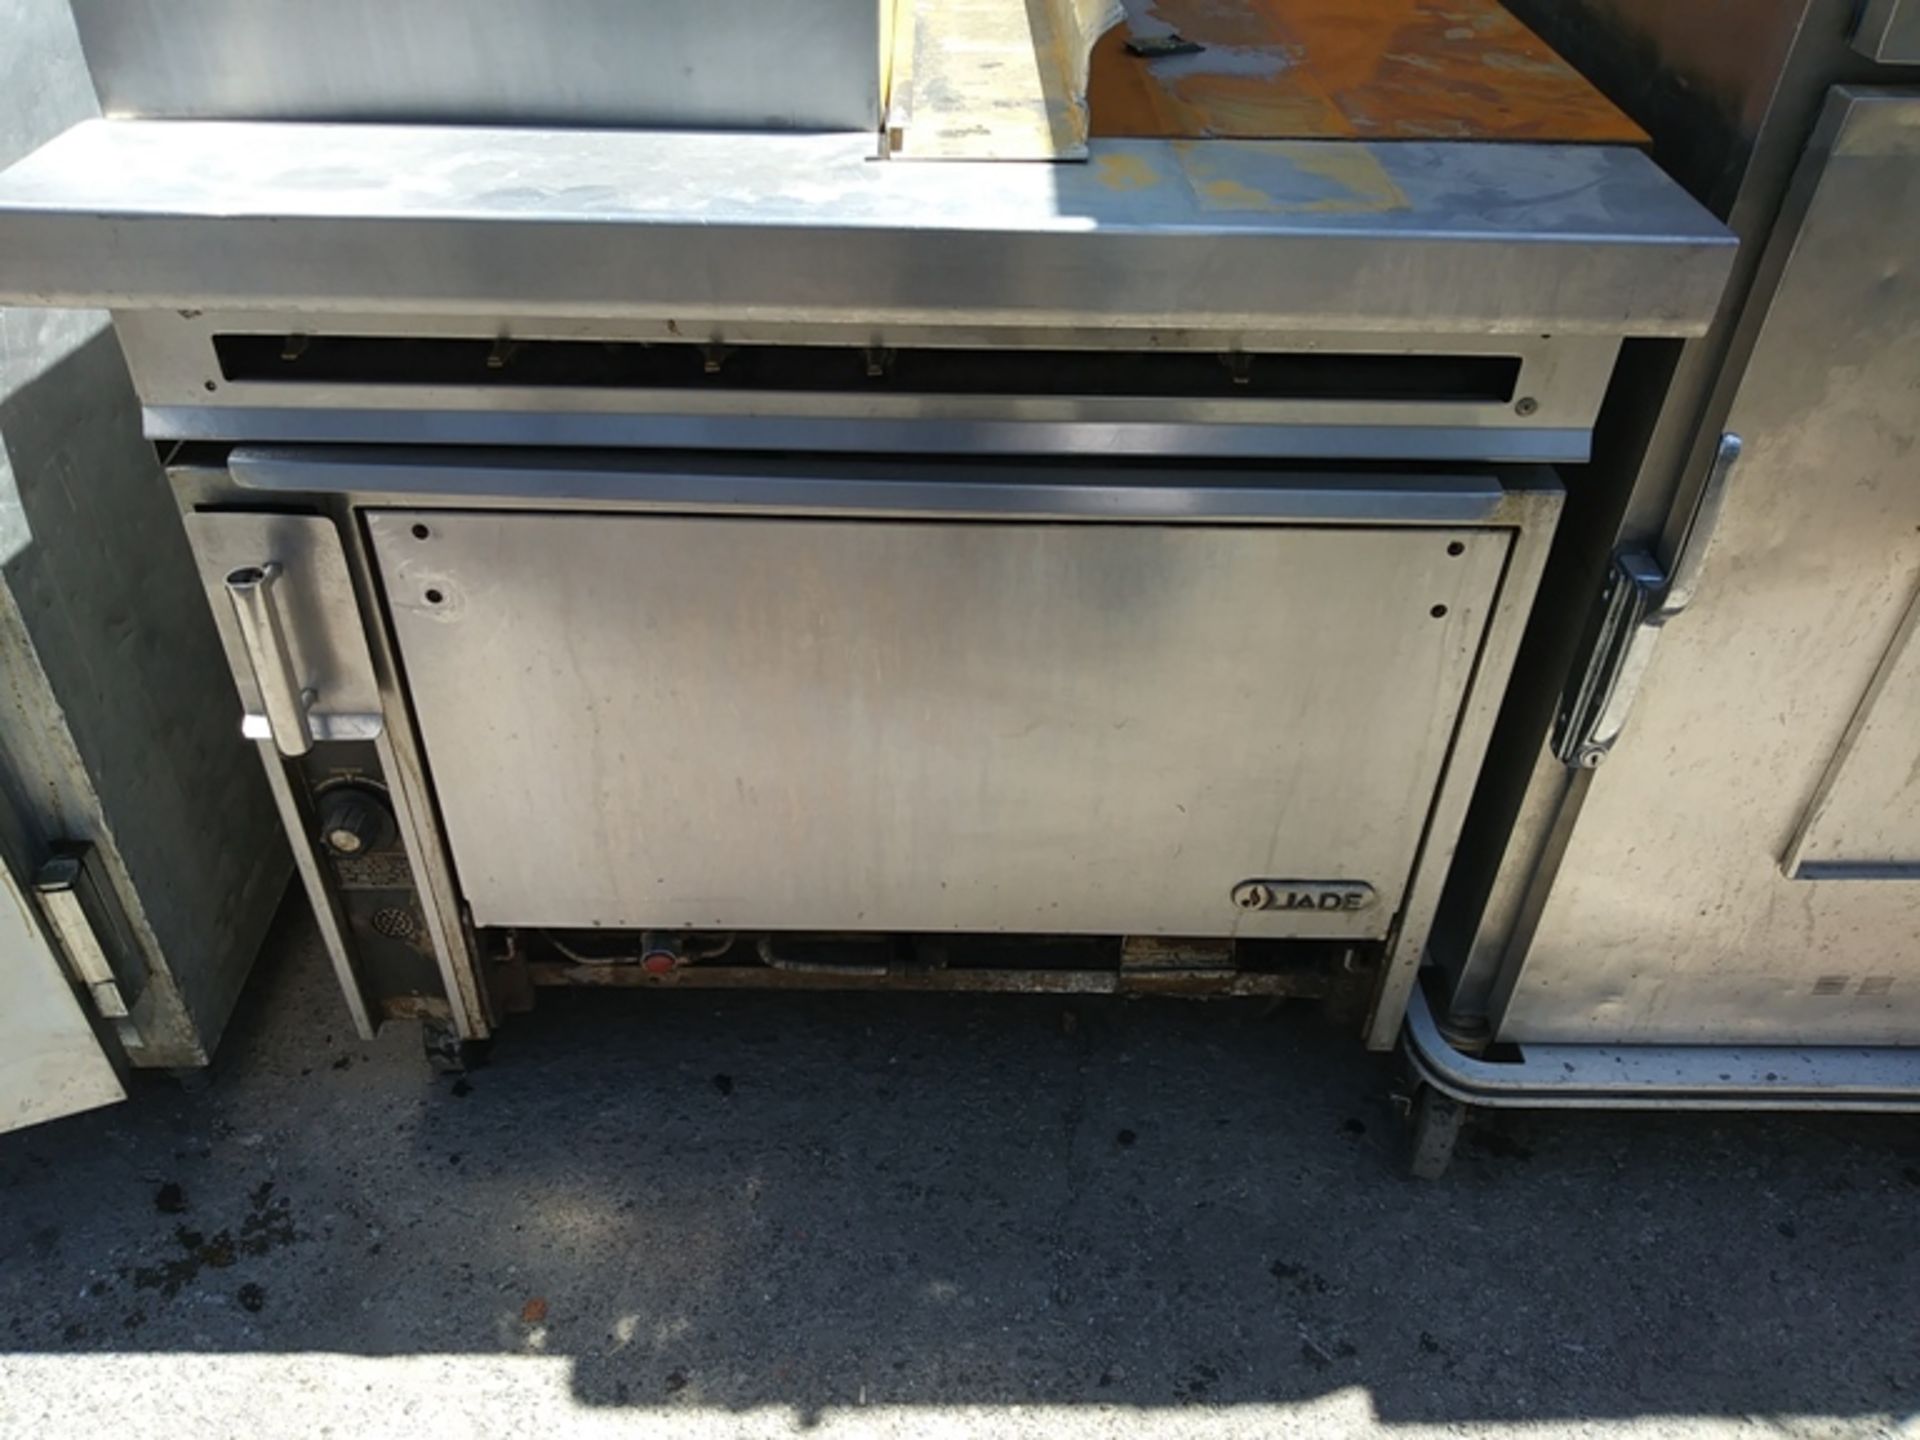 JADE CHARBROILER / OVEN - Image 2 of 3